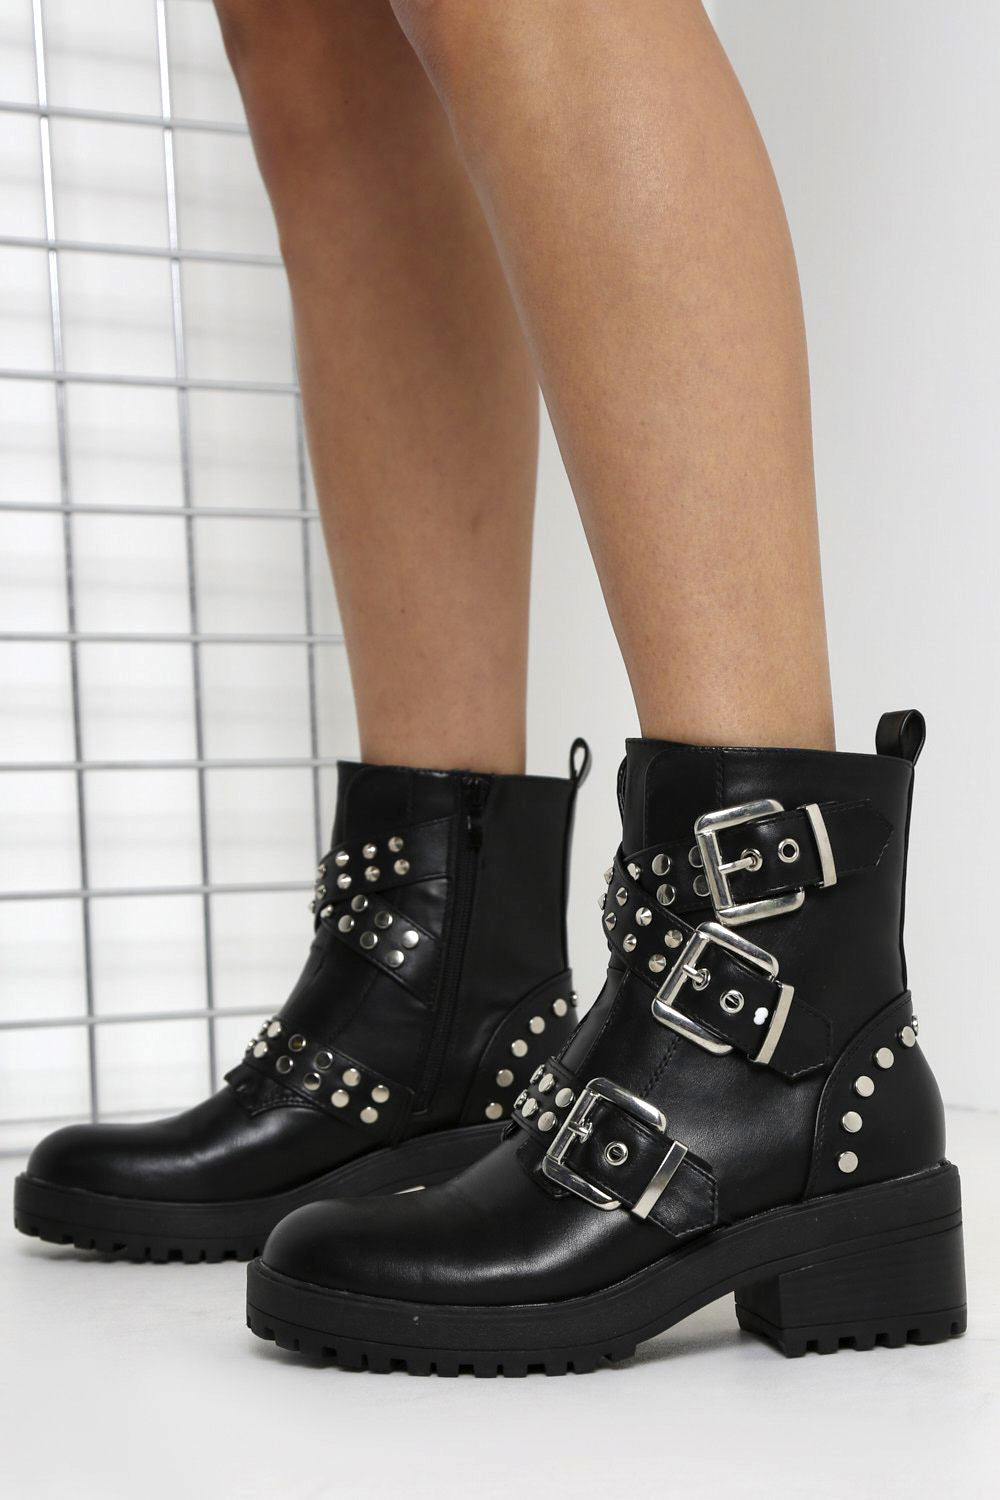 all black studded boots